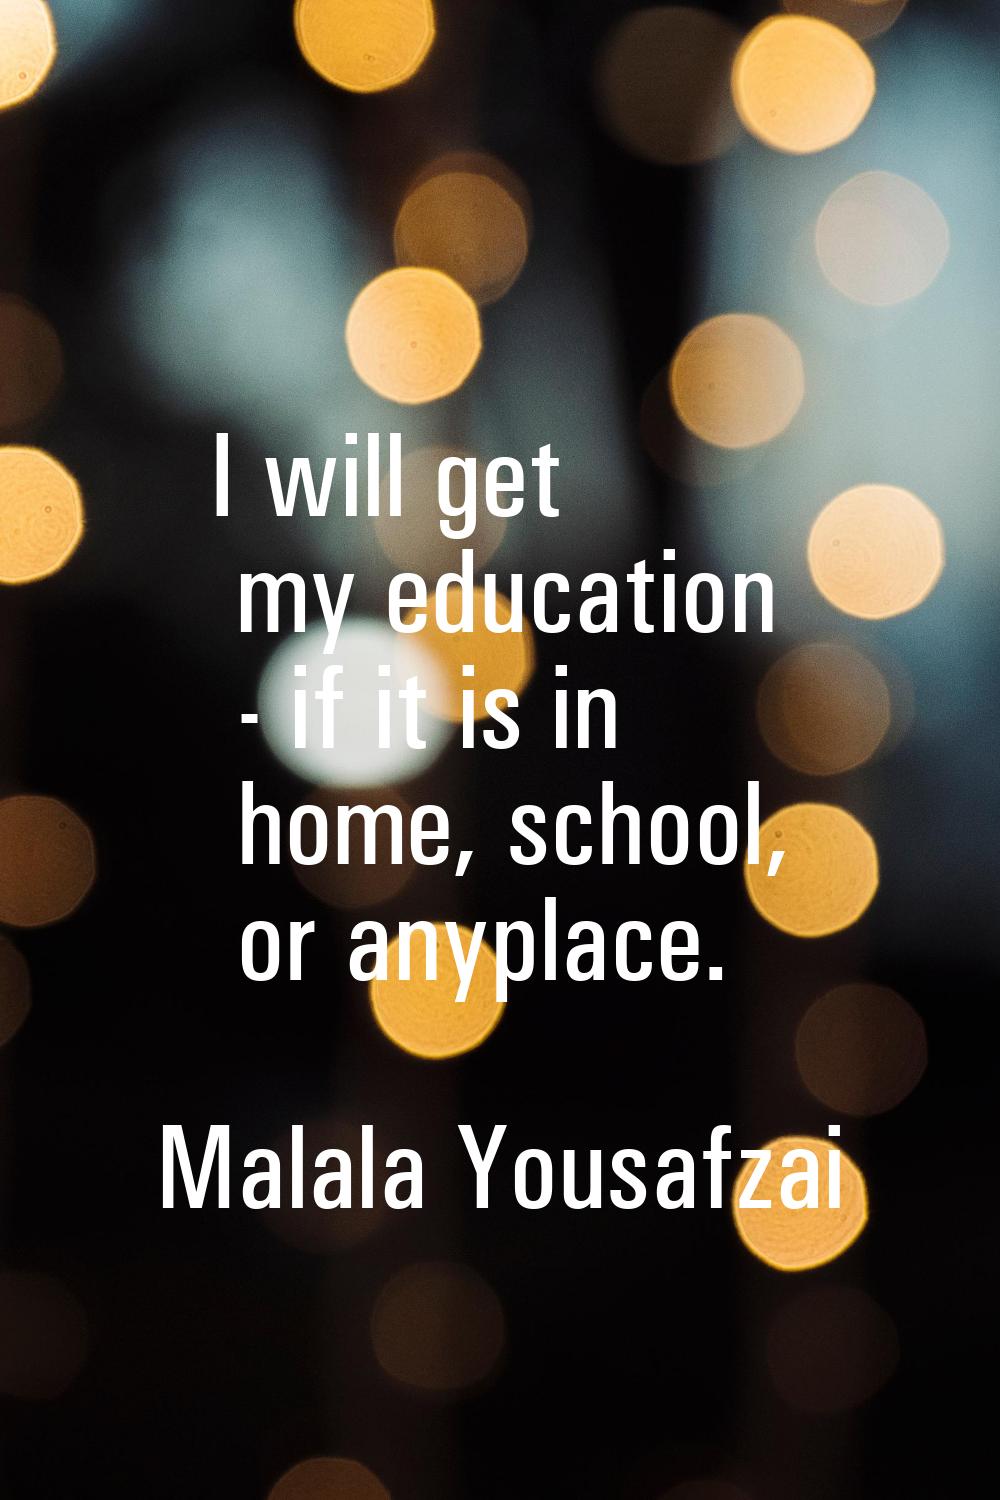 I will get my education - if it is in home, school, or anyplace.